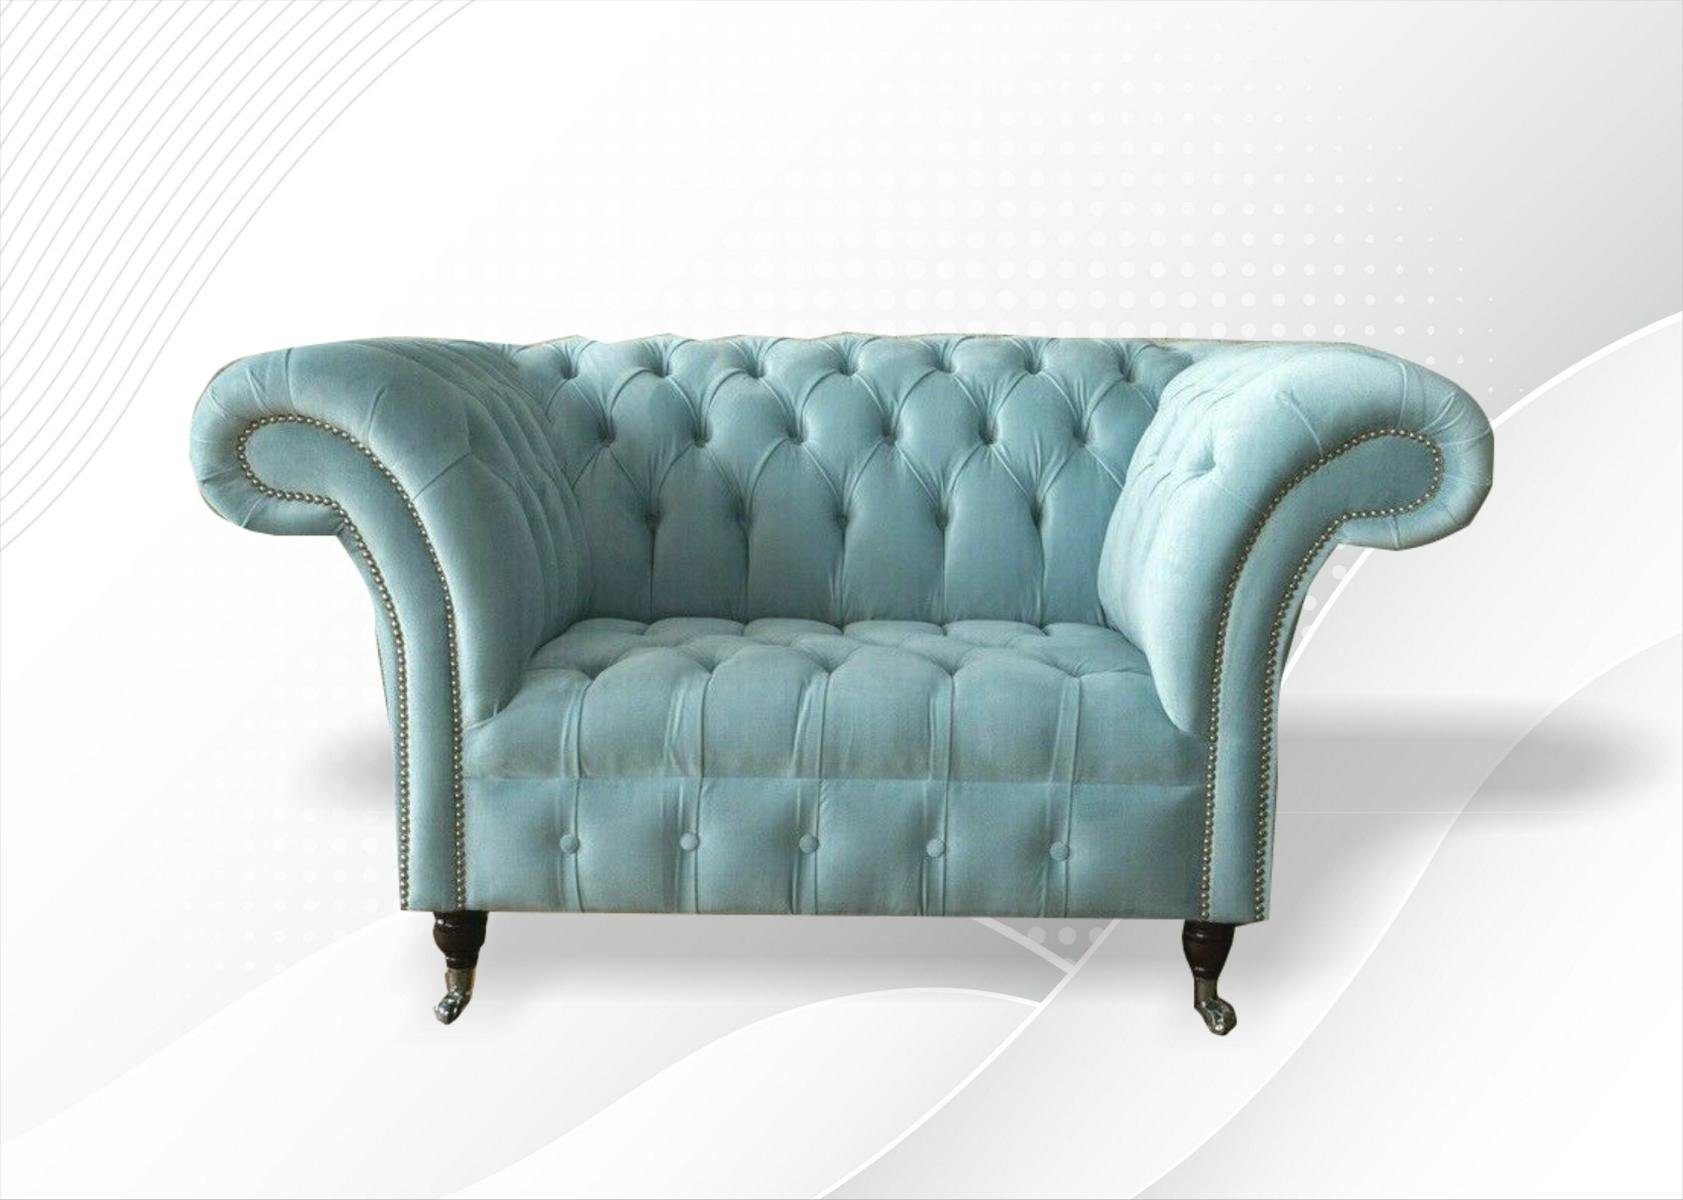 JVmoebel Chesterfield-Sofa, Chesterfield Sessel Design Polster Sofa Couch Couchen Sofas Textil